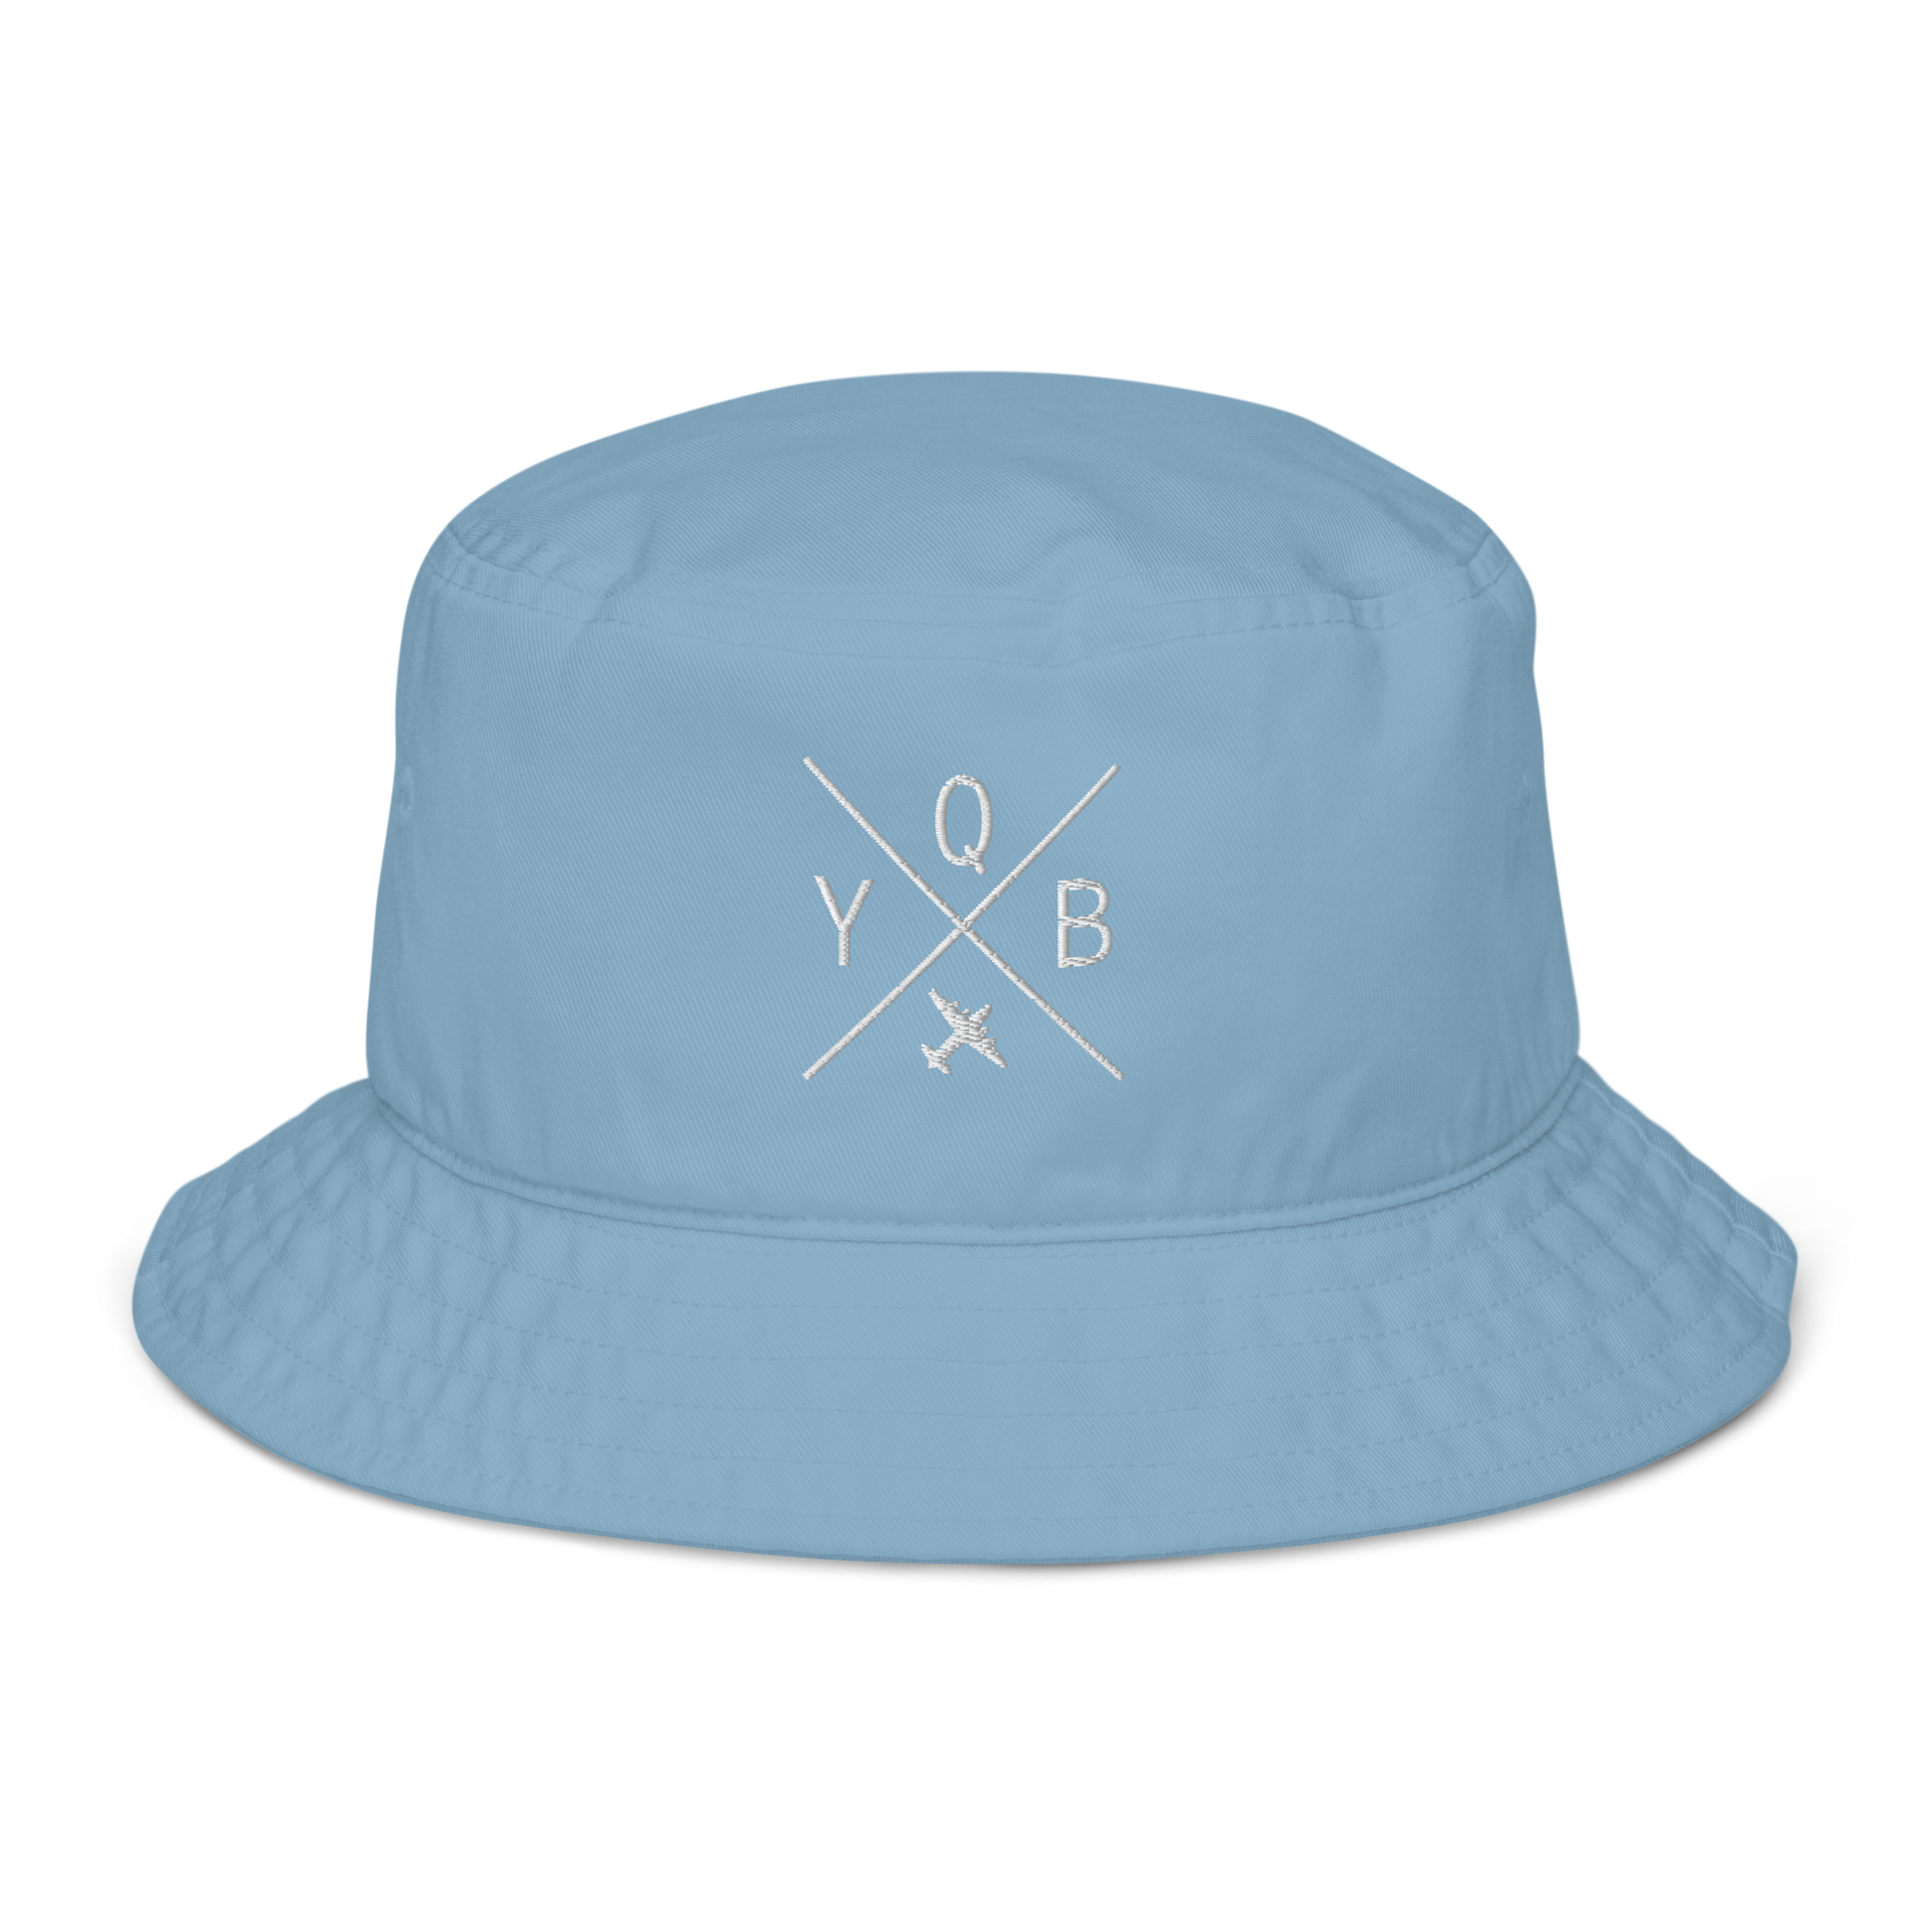 YHM Designs - YQB Quebec City Organic Cotton Bucket Hat - Crossed-X Design with Airport Code and Vintage Propliner - White Embroidery - Image 07